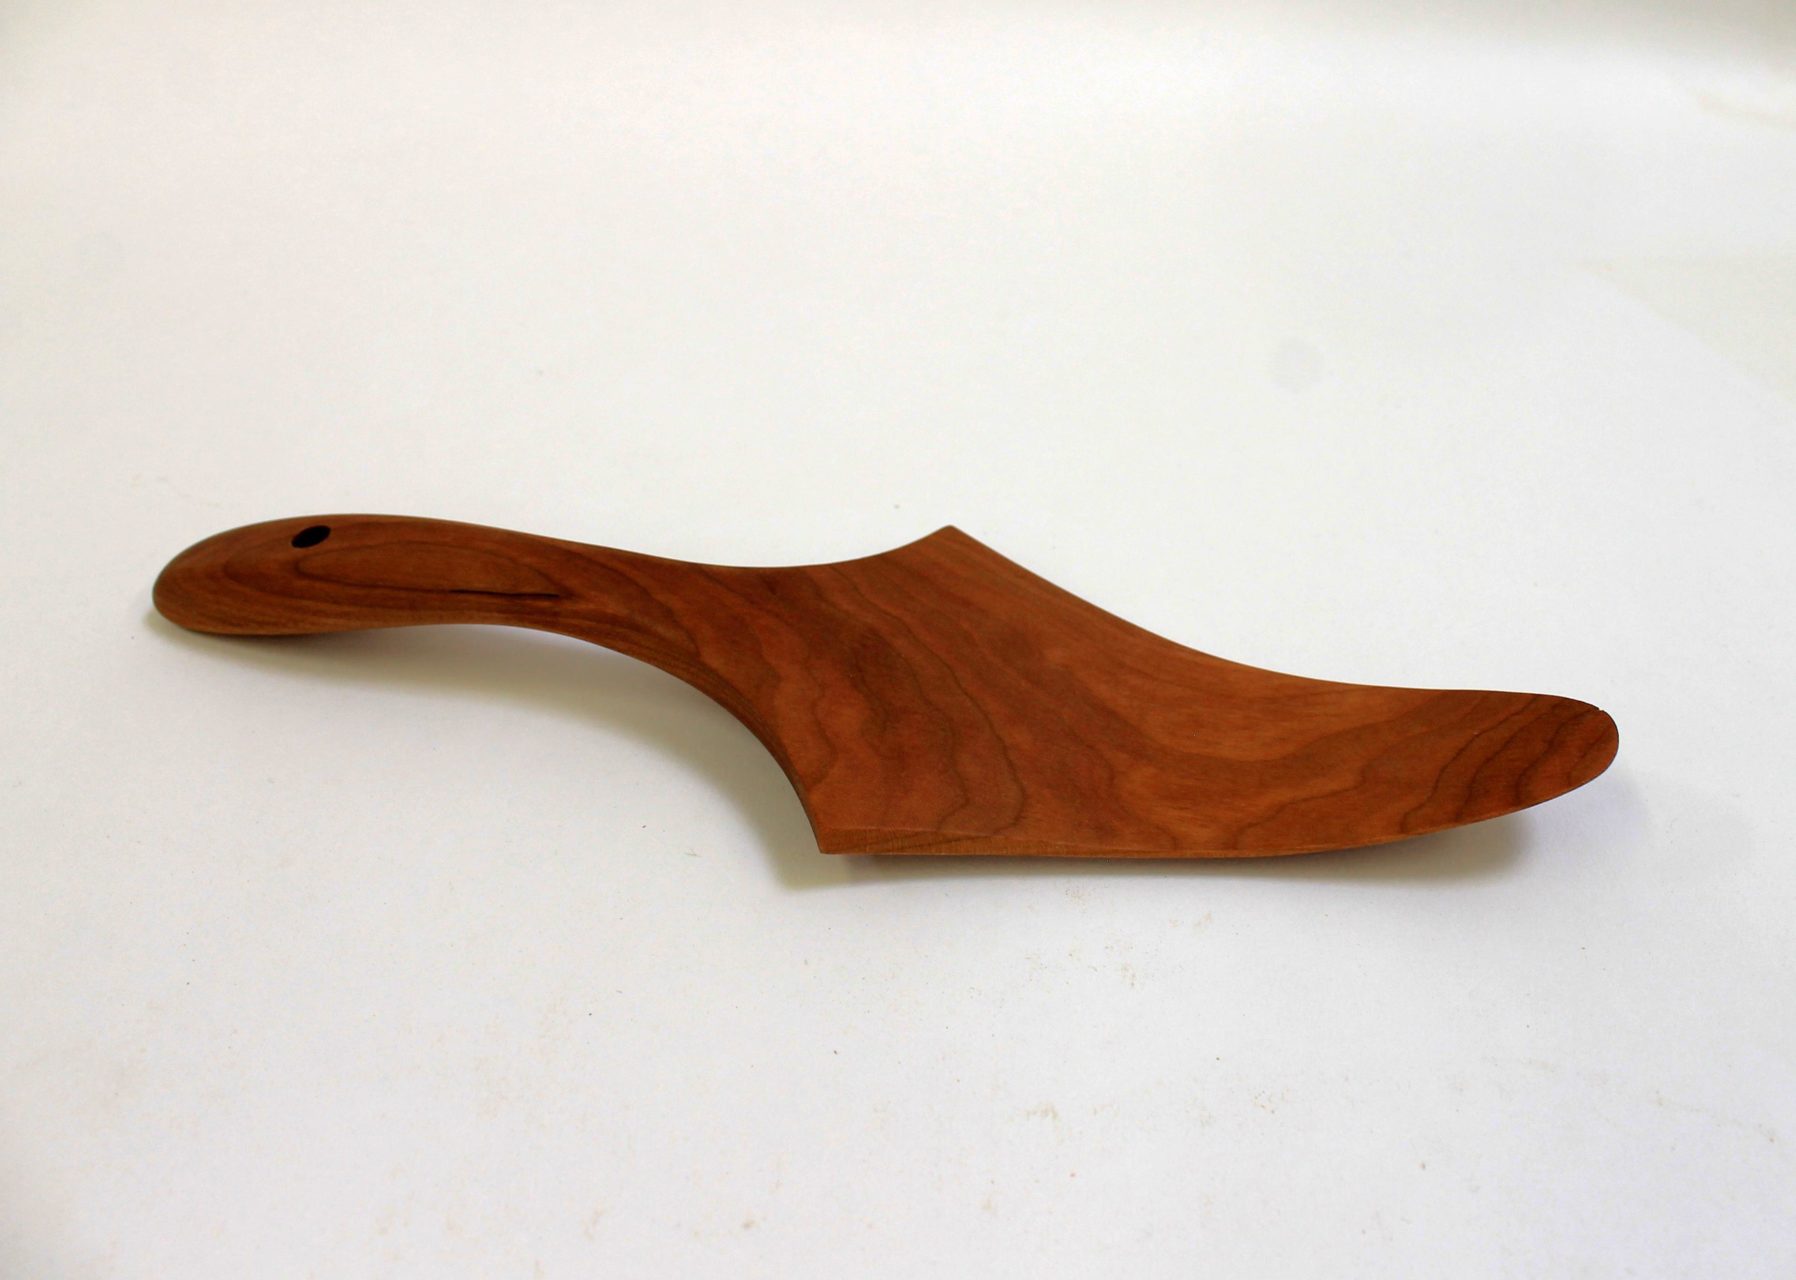 A wooden pie server made from Cherry wood.